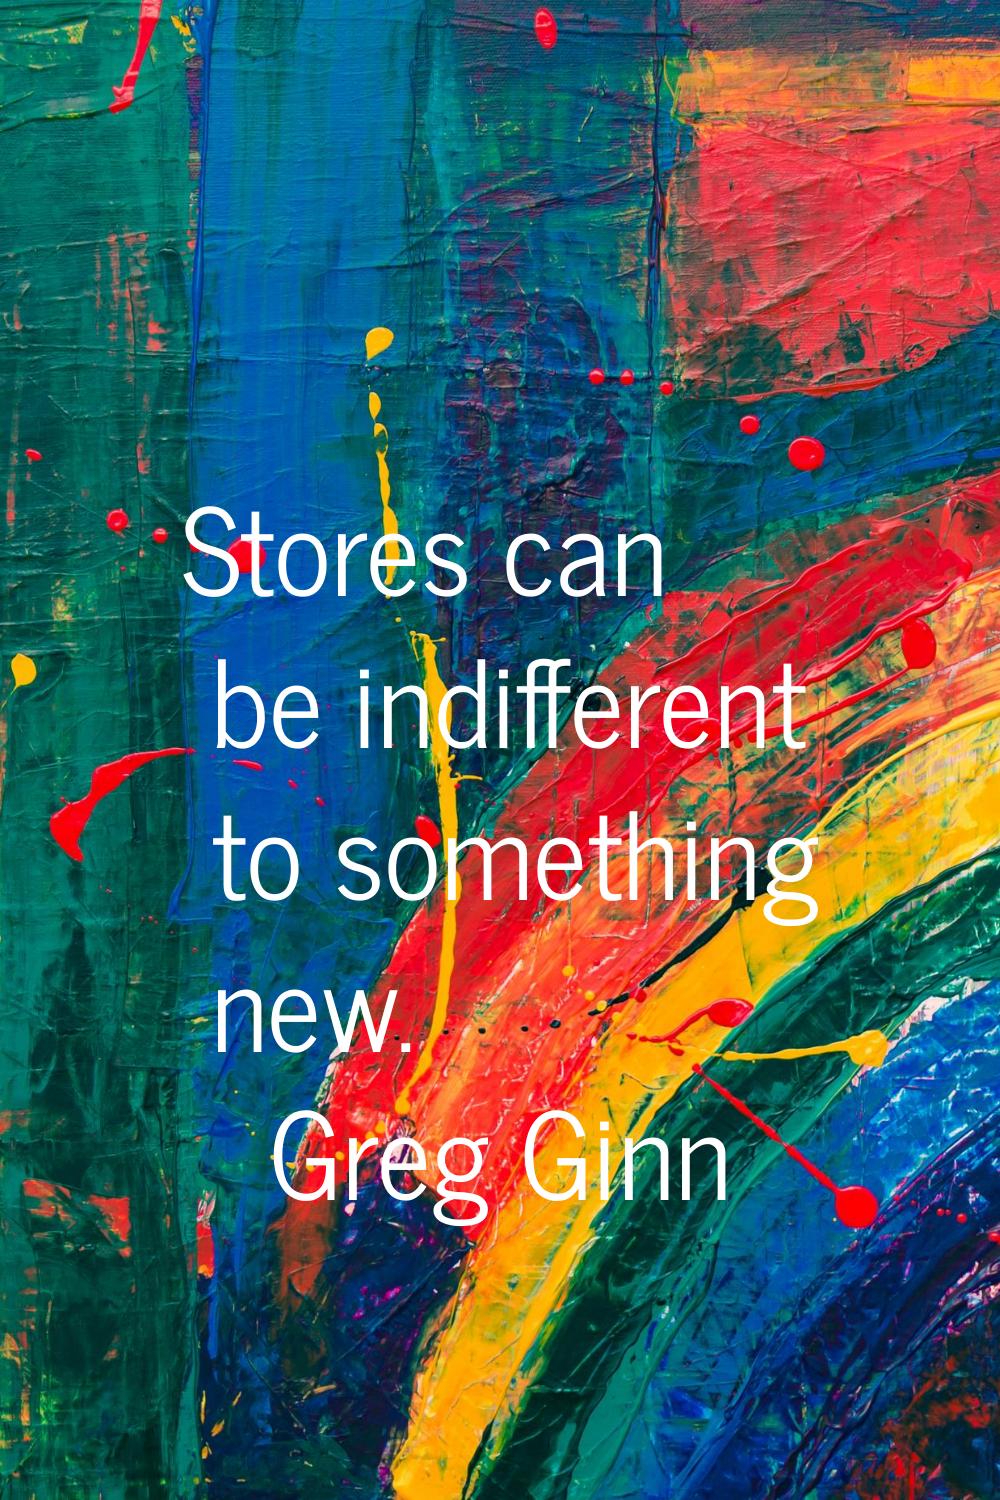 Stores can be indifferent to something new.